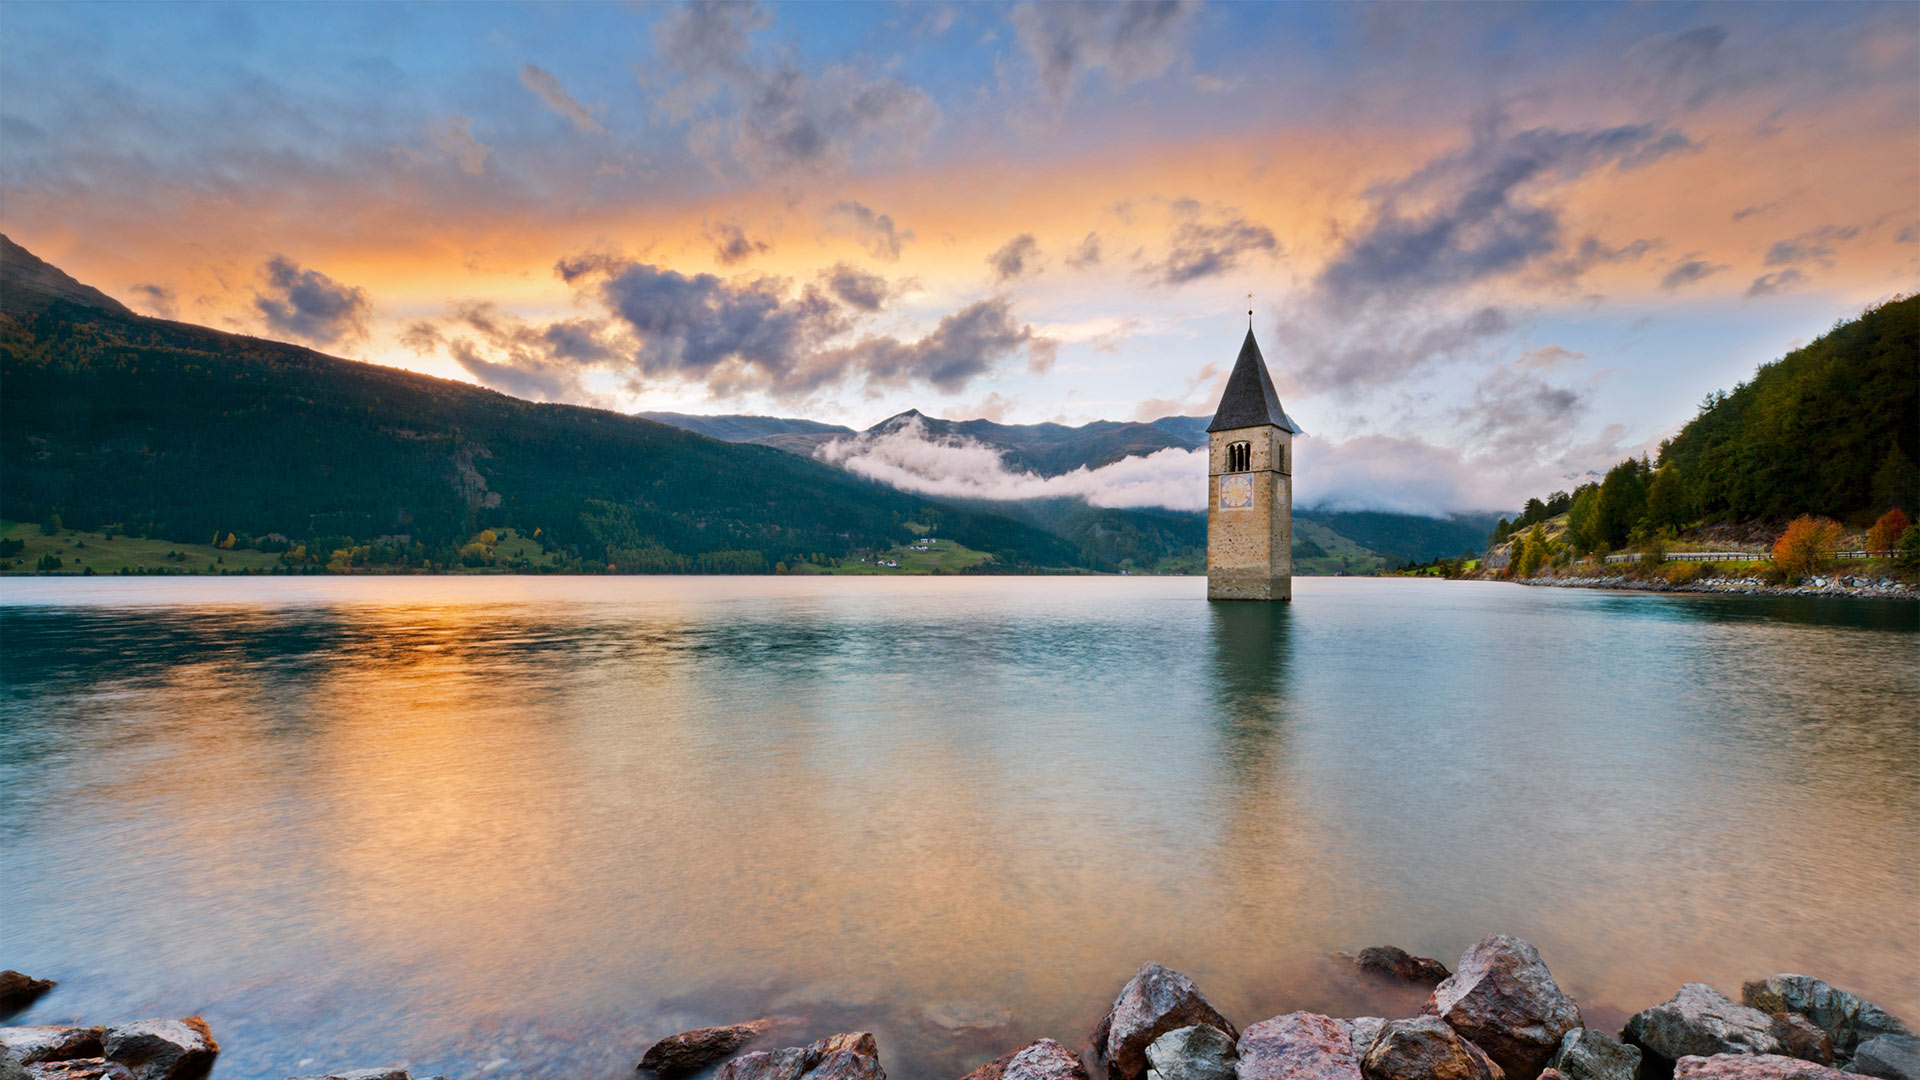 The bell tower in Lake Reschen, South Tyrol, Italy - Scacciamosche/Getty Images)